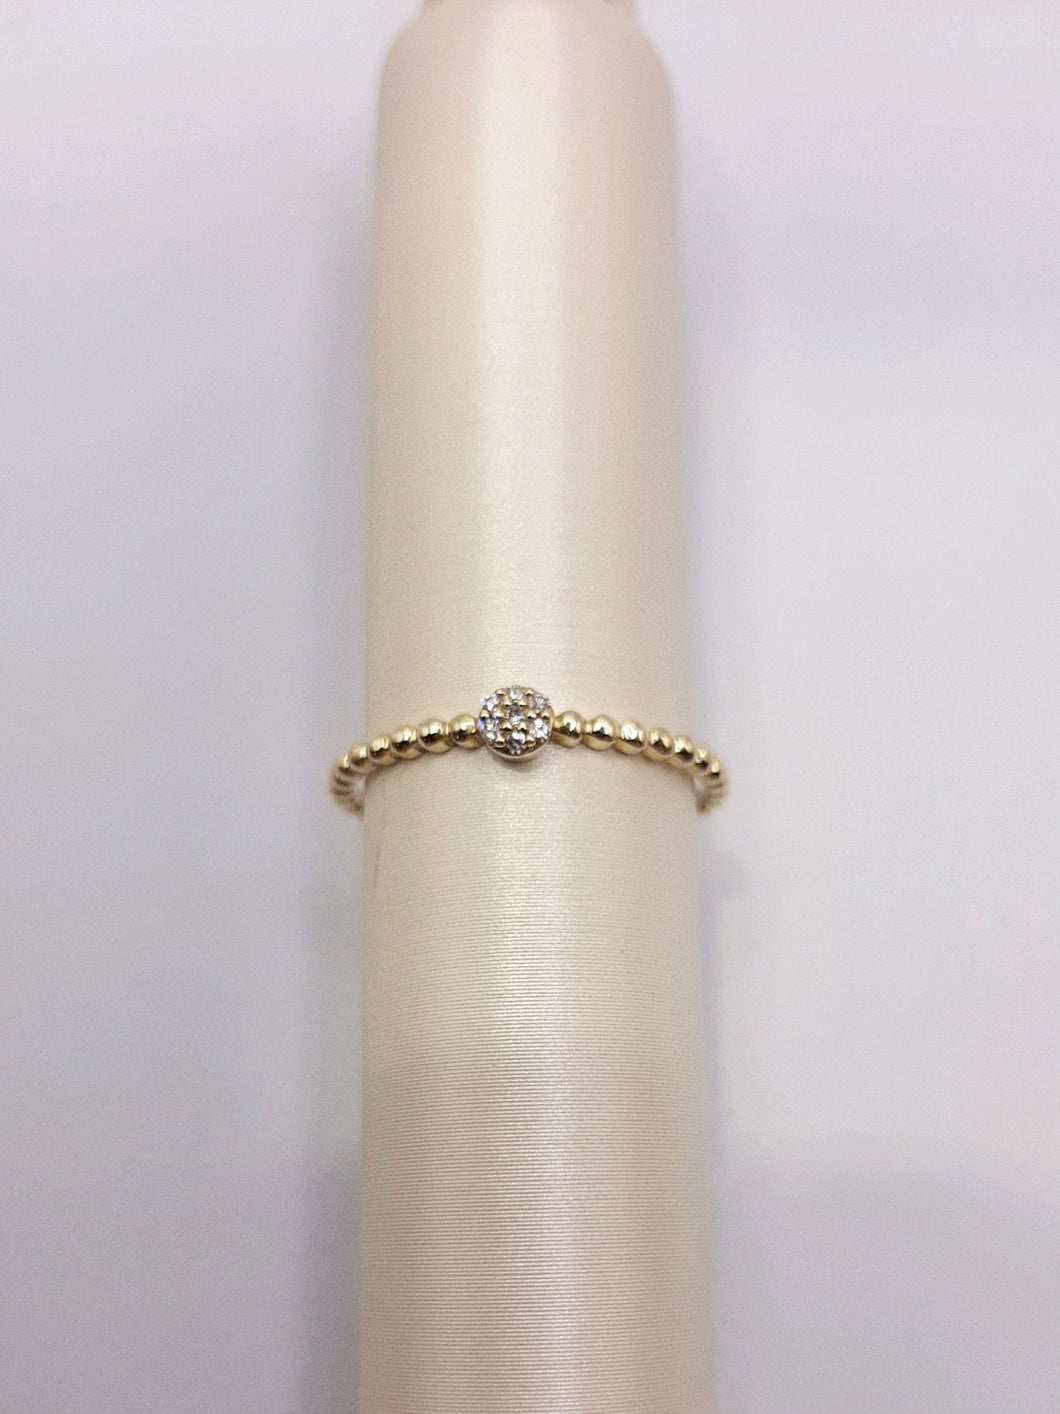 10Kt Yellow Gold .02 Carat Diamond Cluster on a Beaded Band